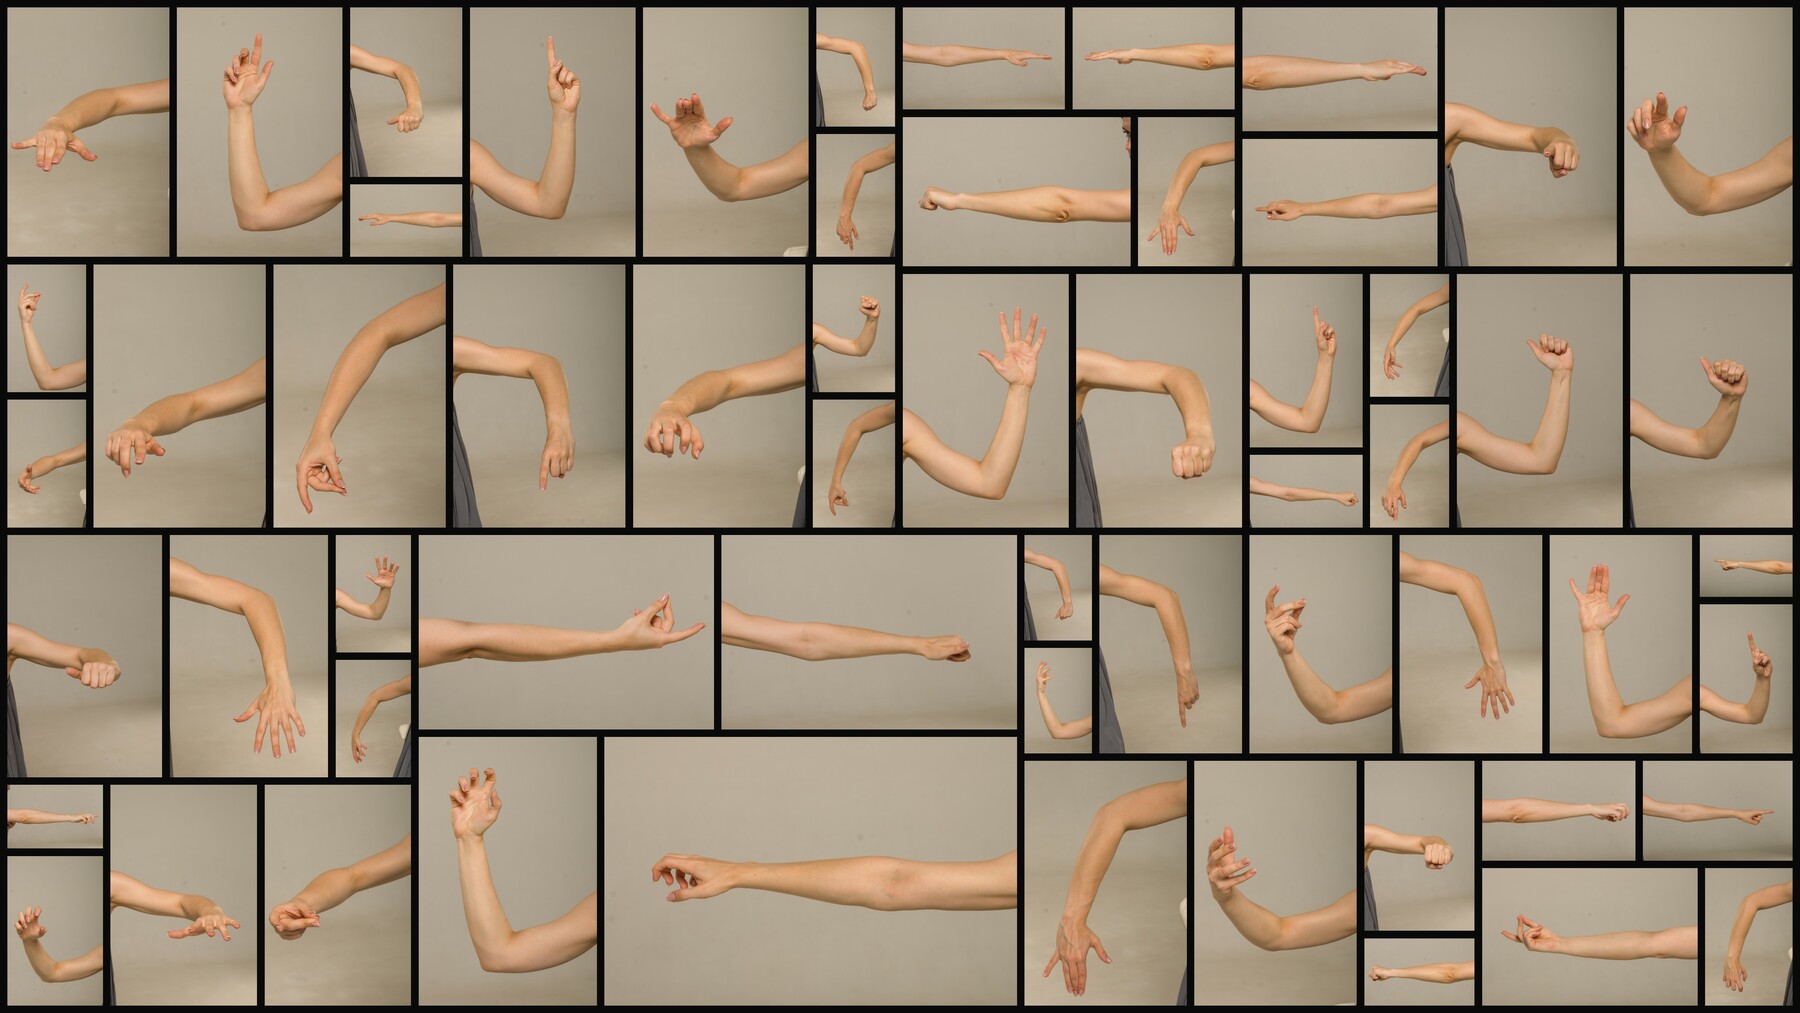 ArtStation - 400+ Reference Pictures Women's Hands From Different Angles -  For Artist And Sculptors